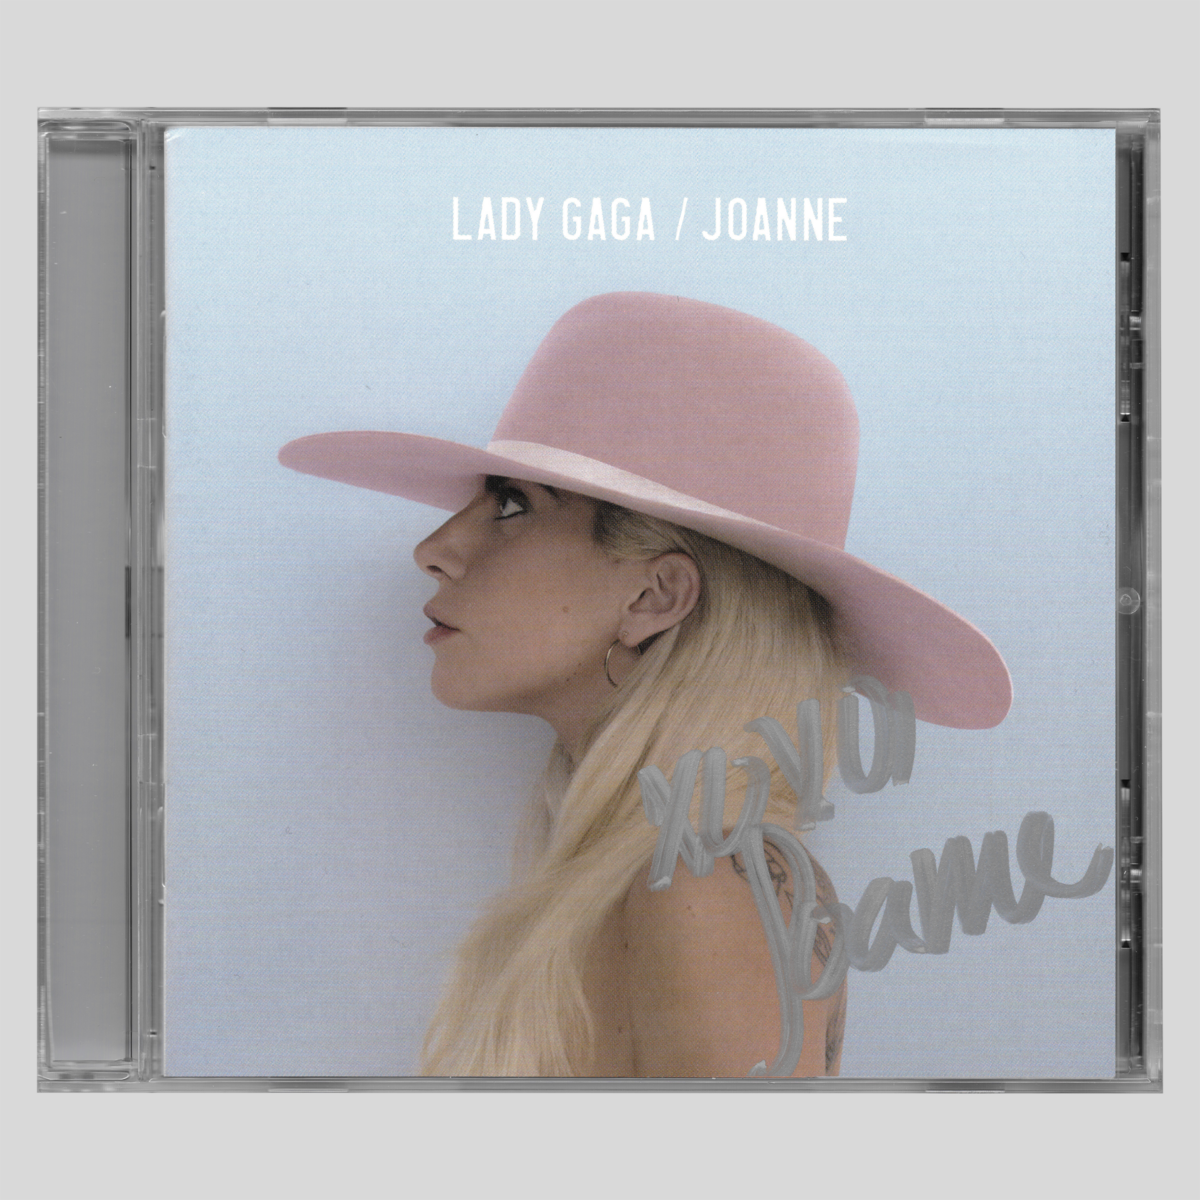 Joanne (Autographed Booklet)